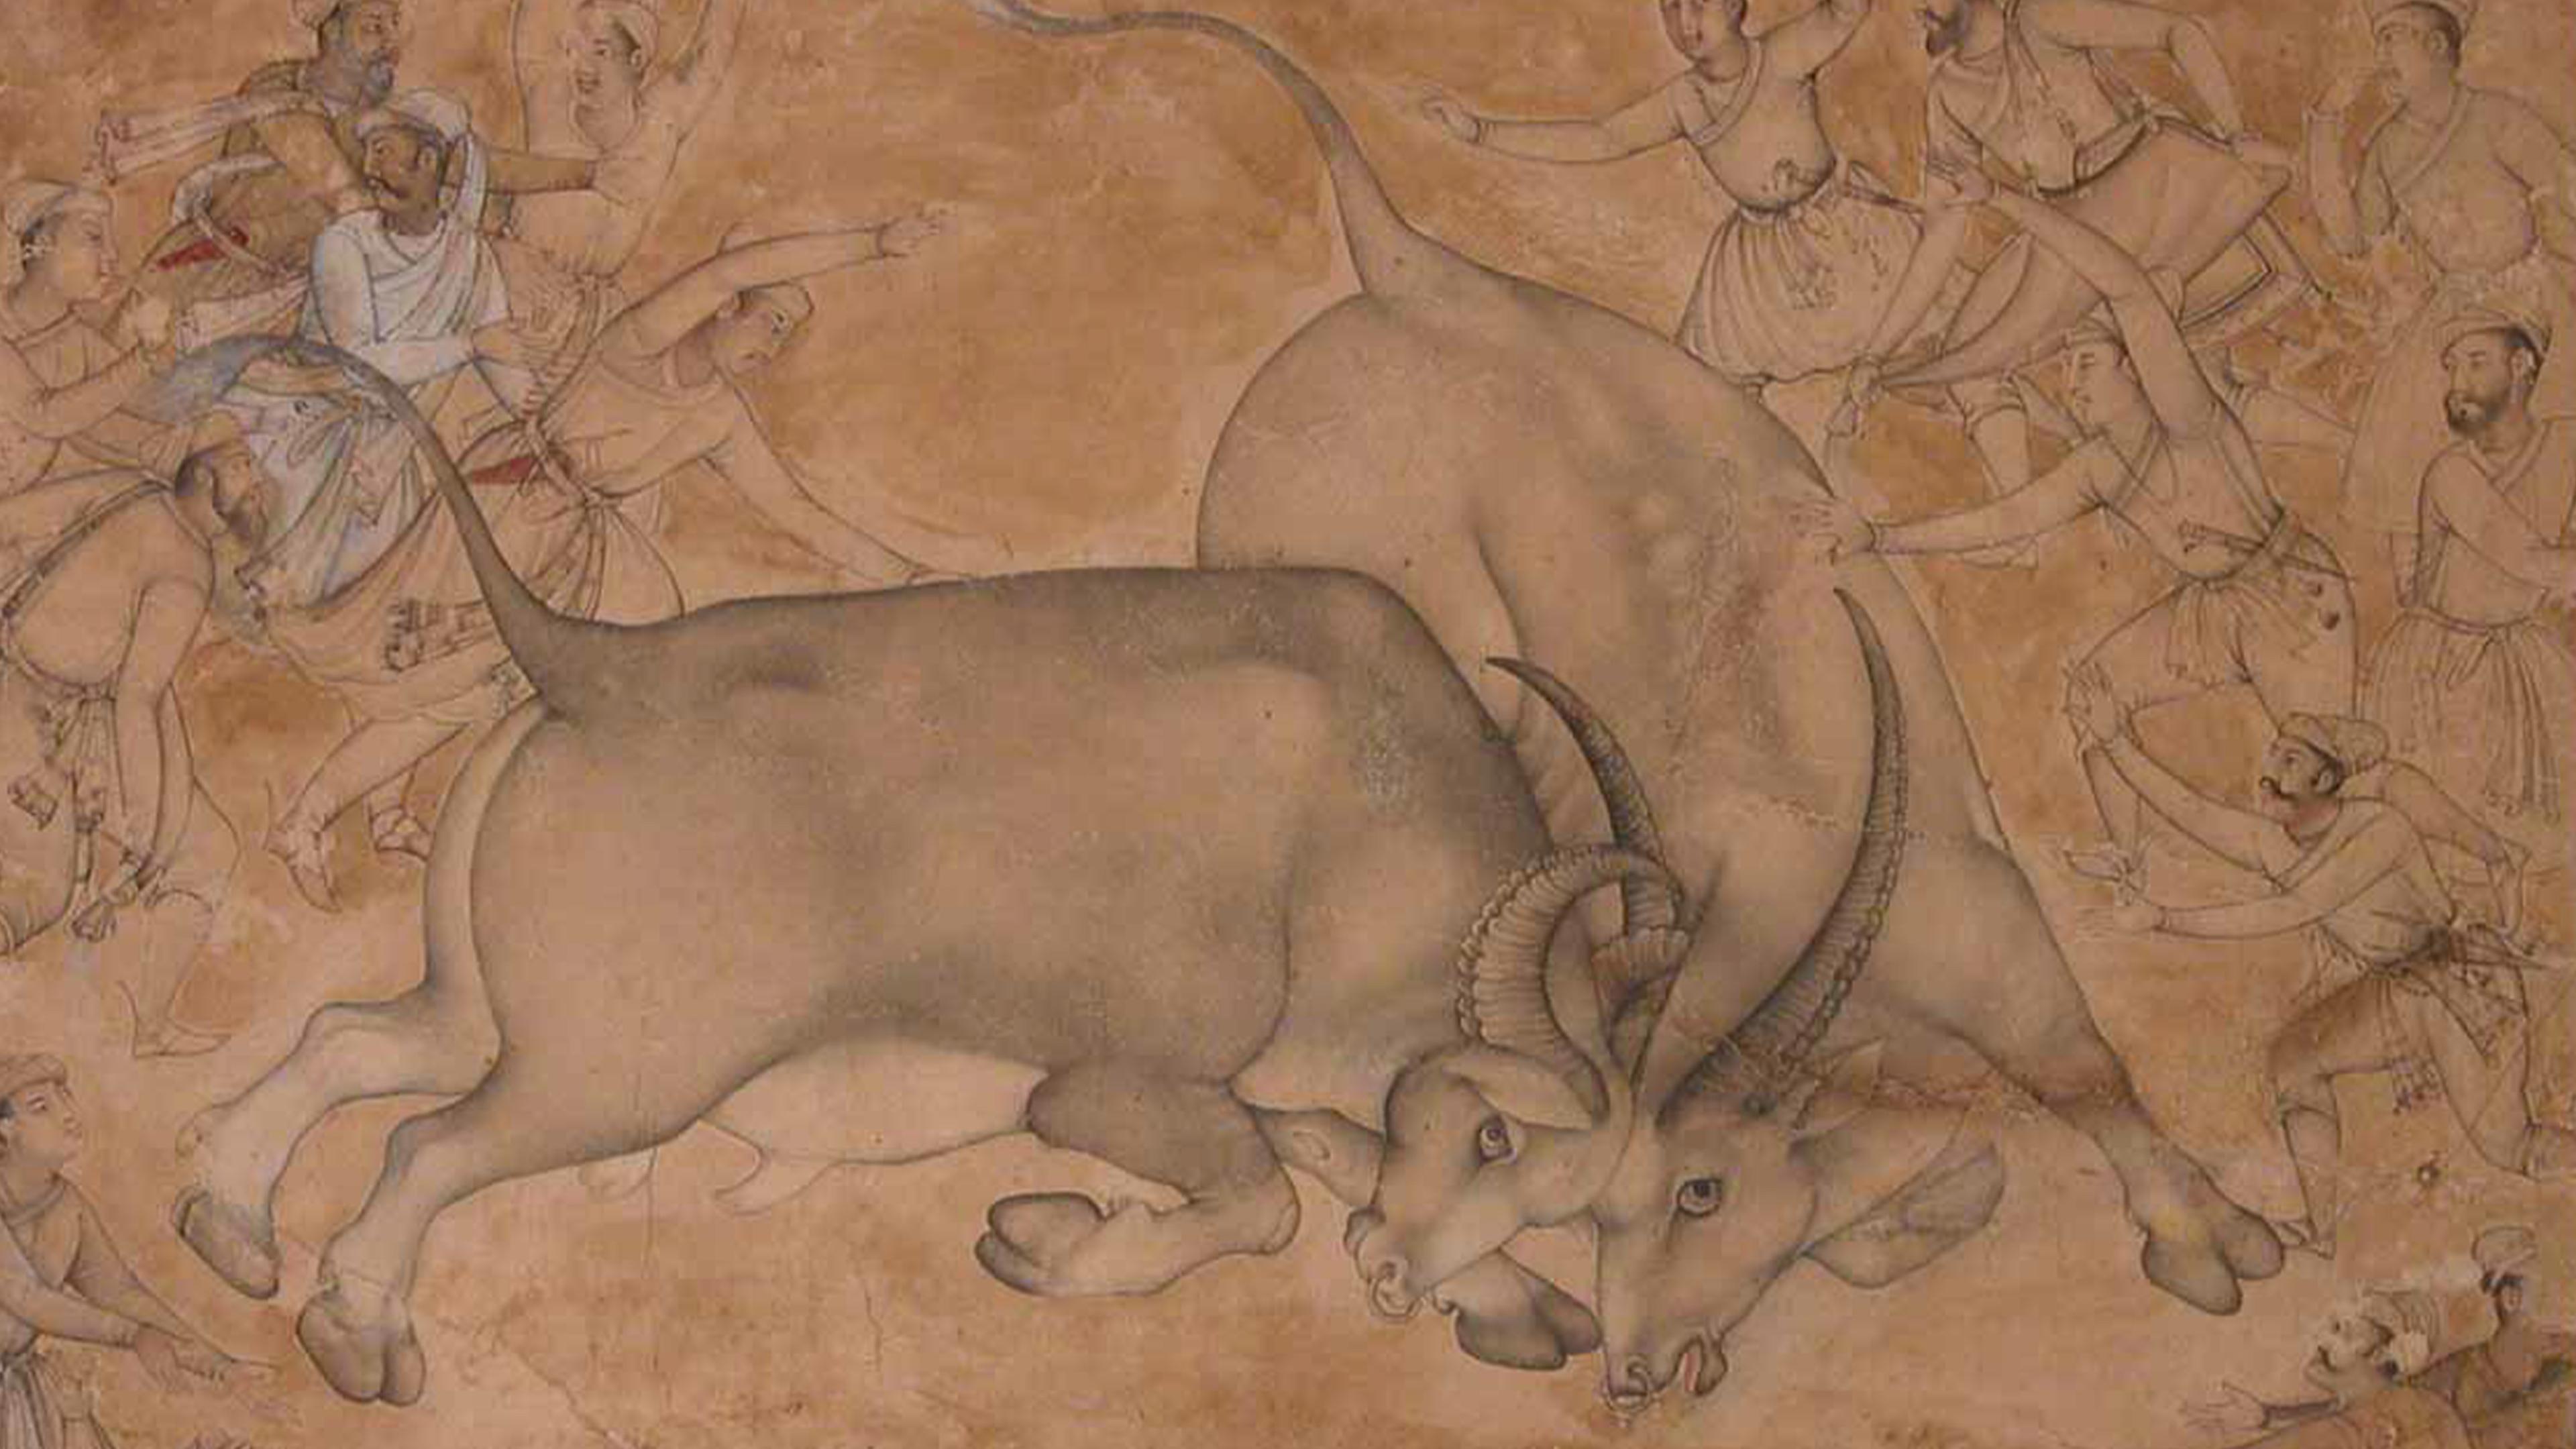 An ancient fresco depicts a dynamic scene where multiple figures attempt to subdue a large, powerful bull, showcasing the artistic style and storytelling of a bygone era.